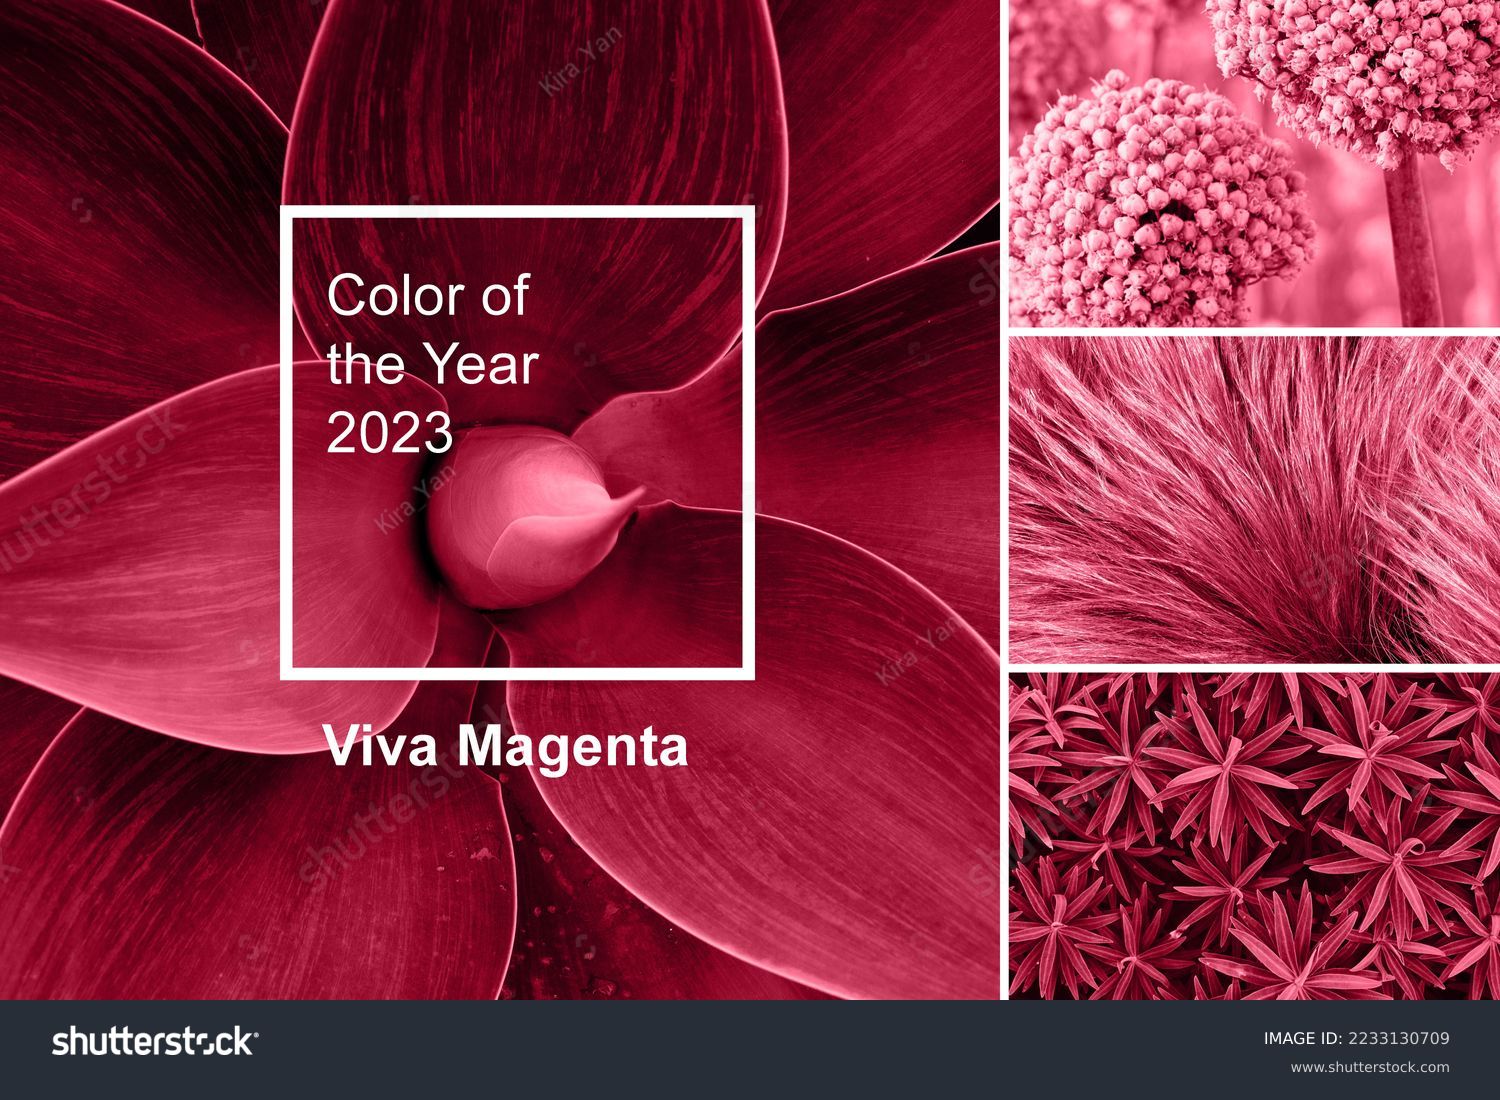 Trendy color of year 2023 - Viva Magenta. Fashion color palette sample. Abstract floral pattern swatch colors collage. Viva Magenta #2233130709